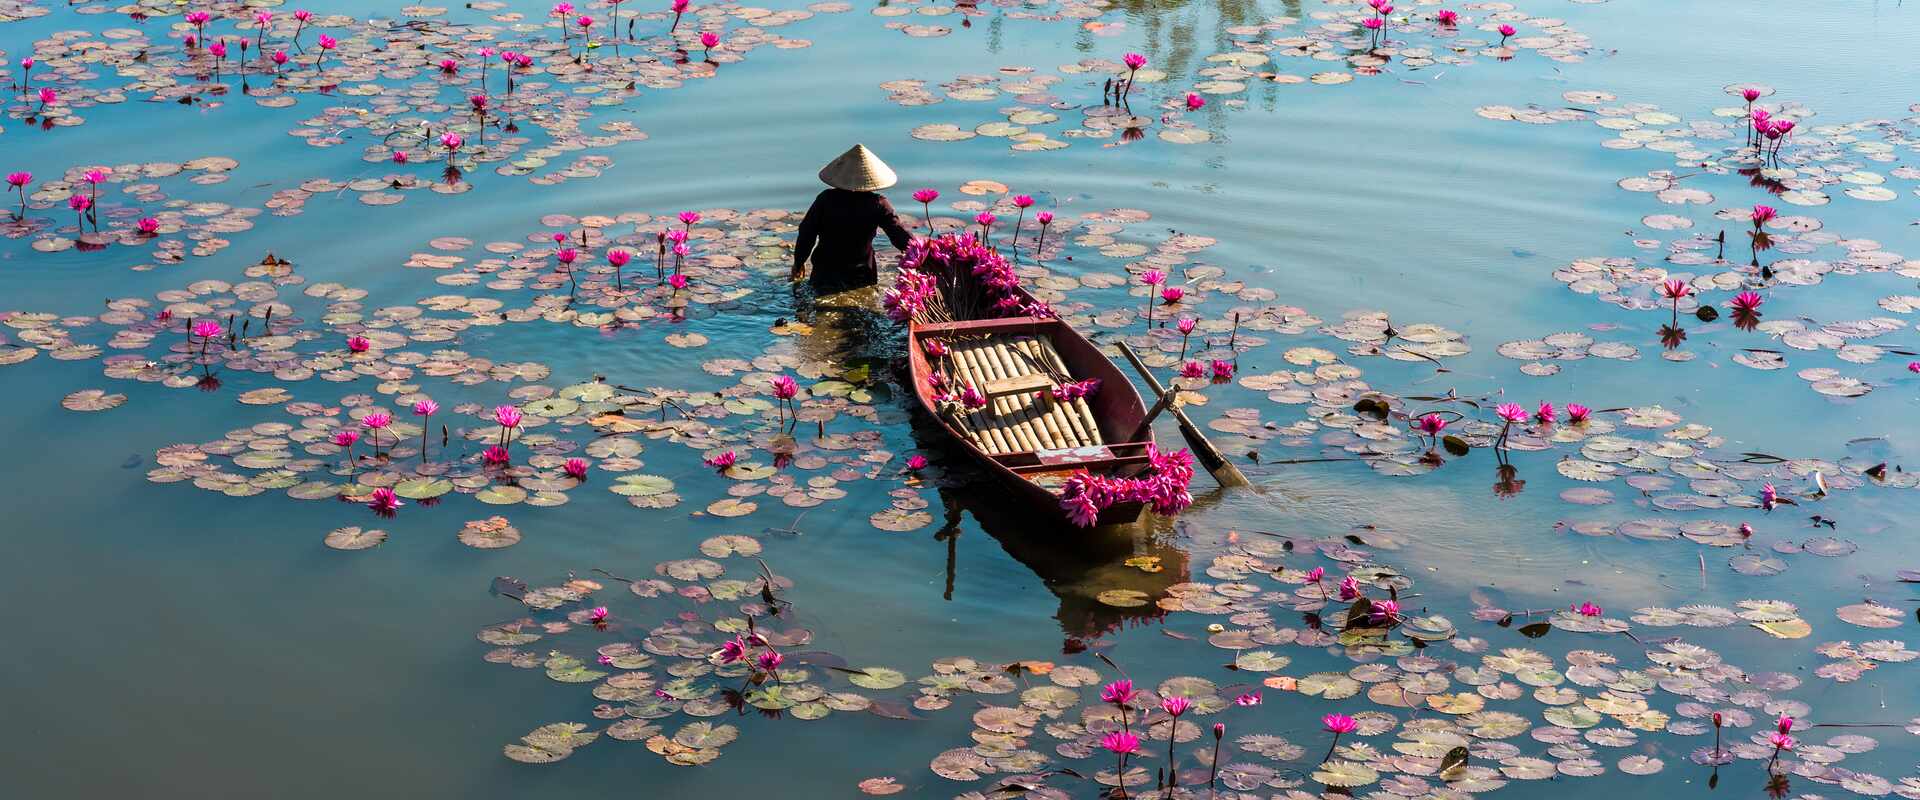 A person walking through the water pulling a boat surrounded by waterlillies